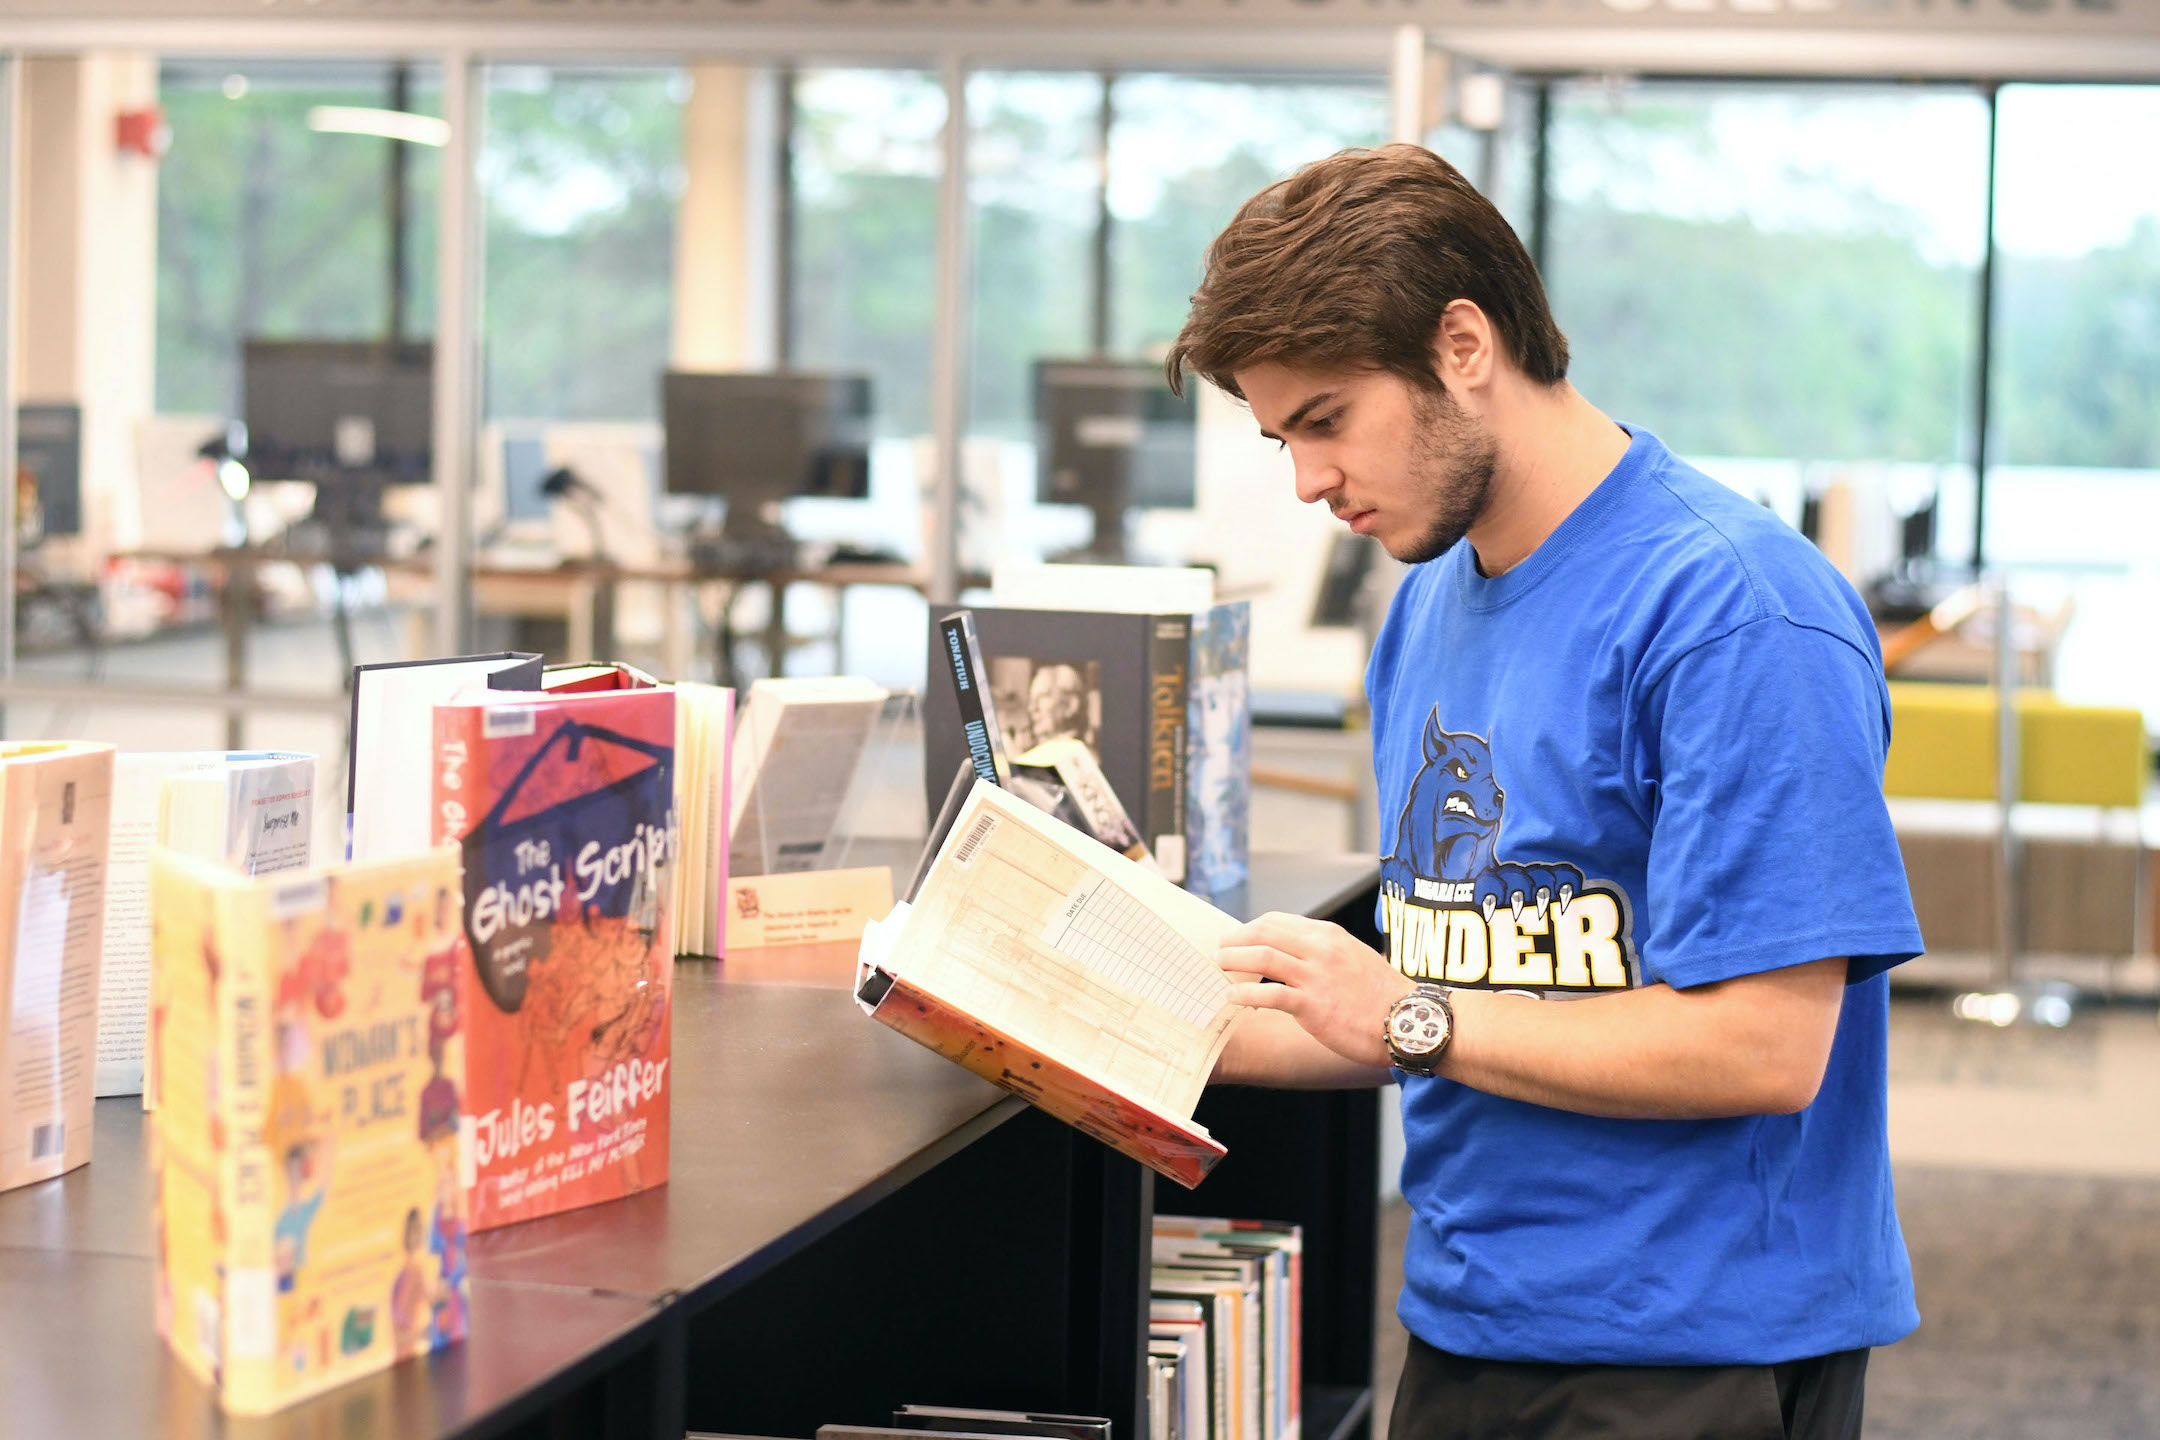 NCCC alumnus Matthew Archambault reads through the new releases available at the Lewis Library.